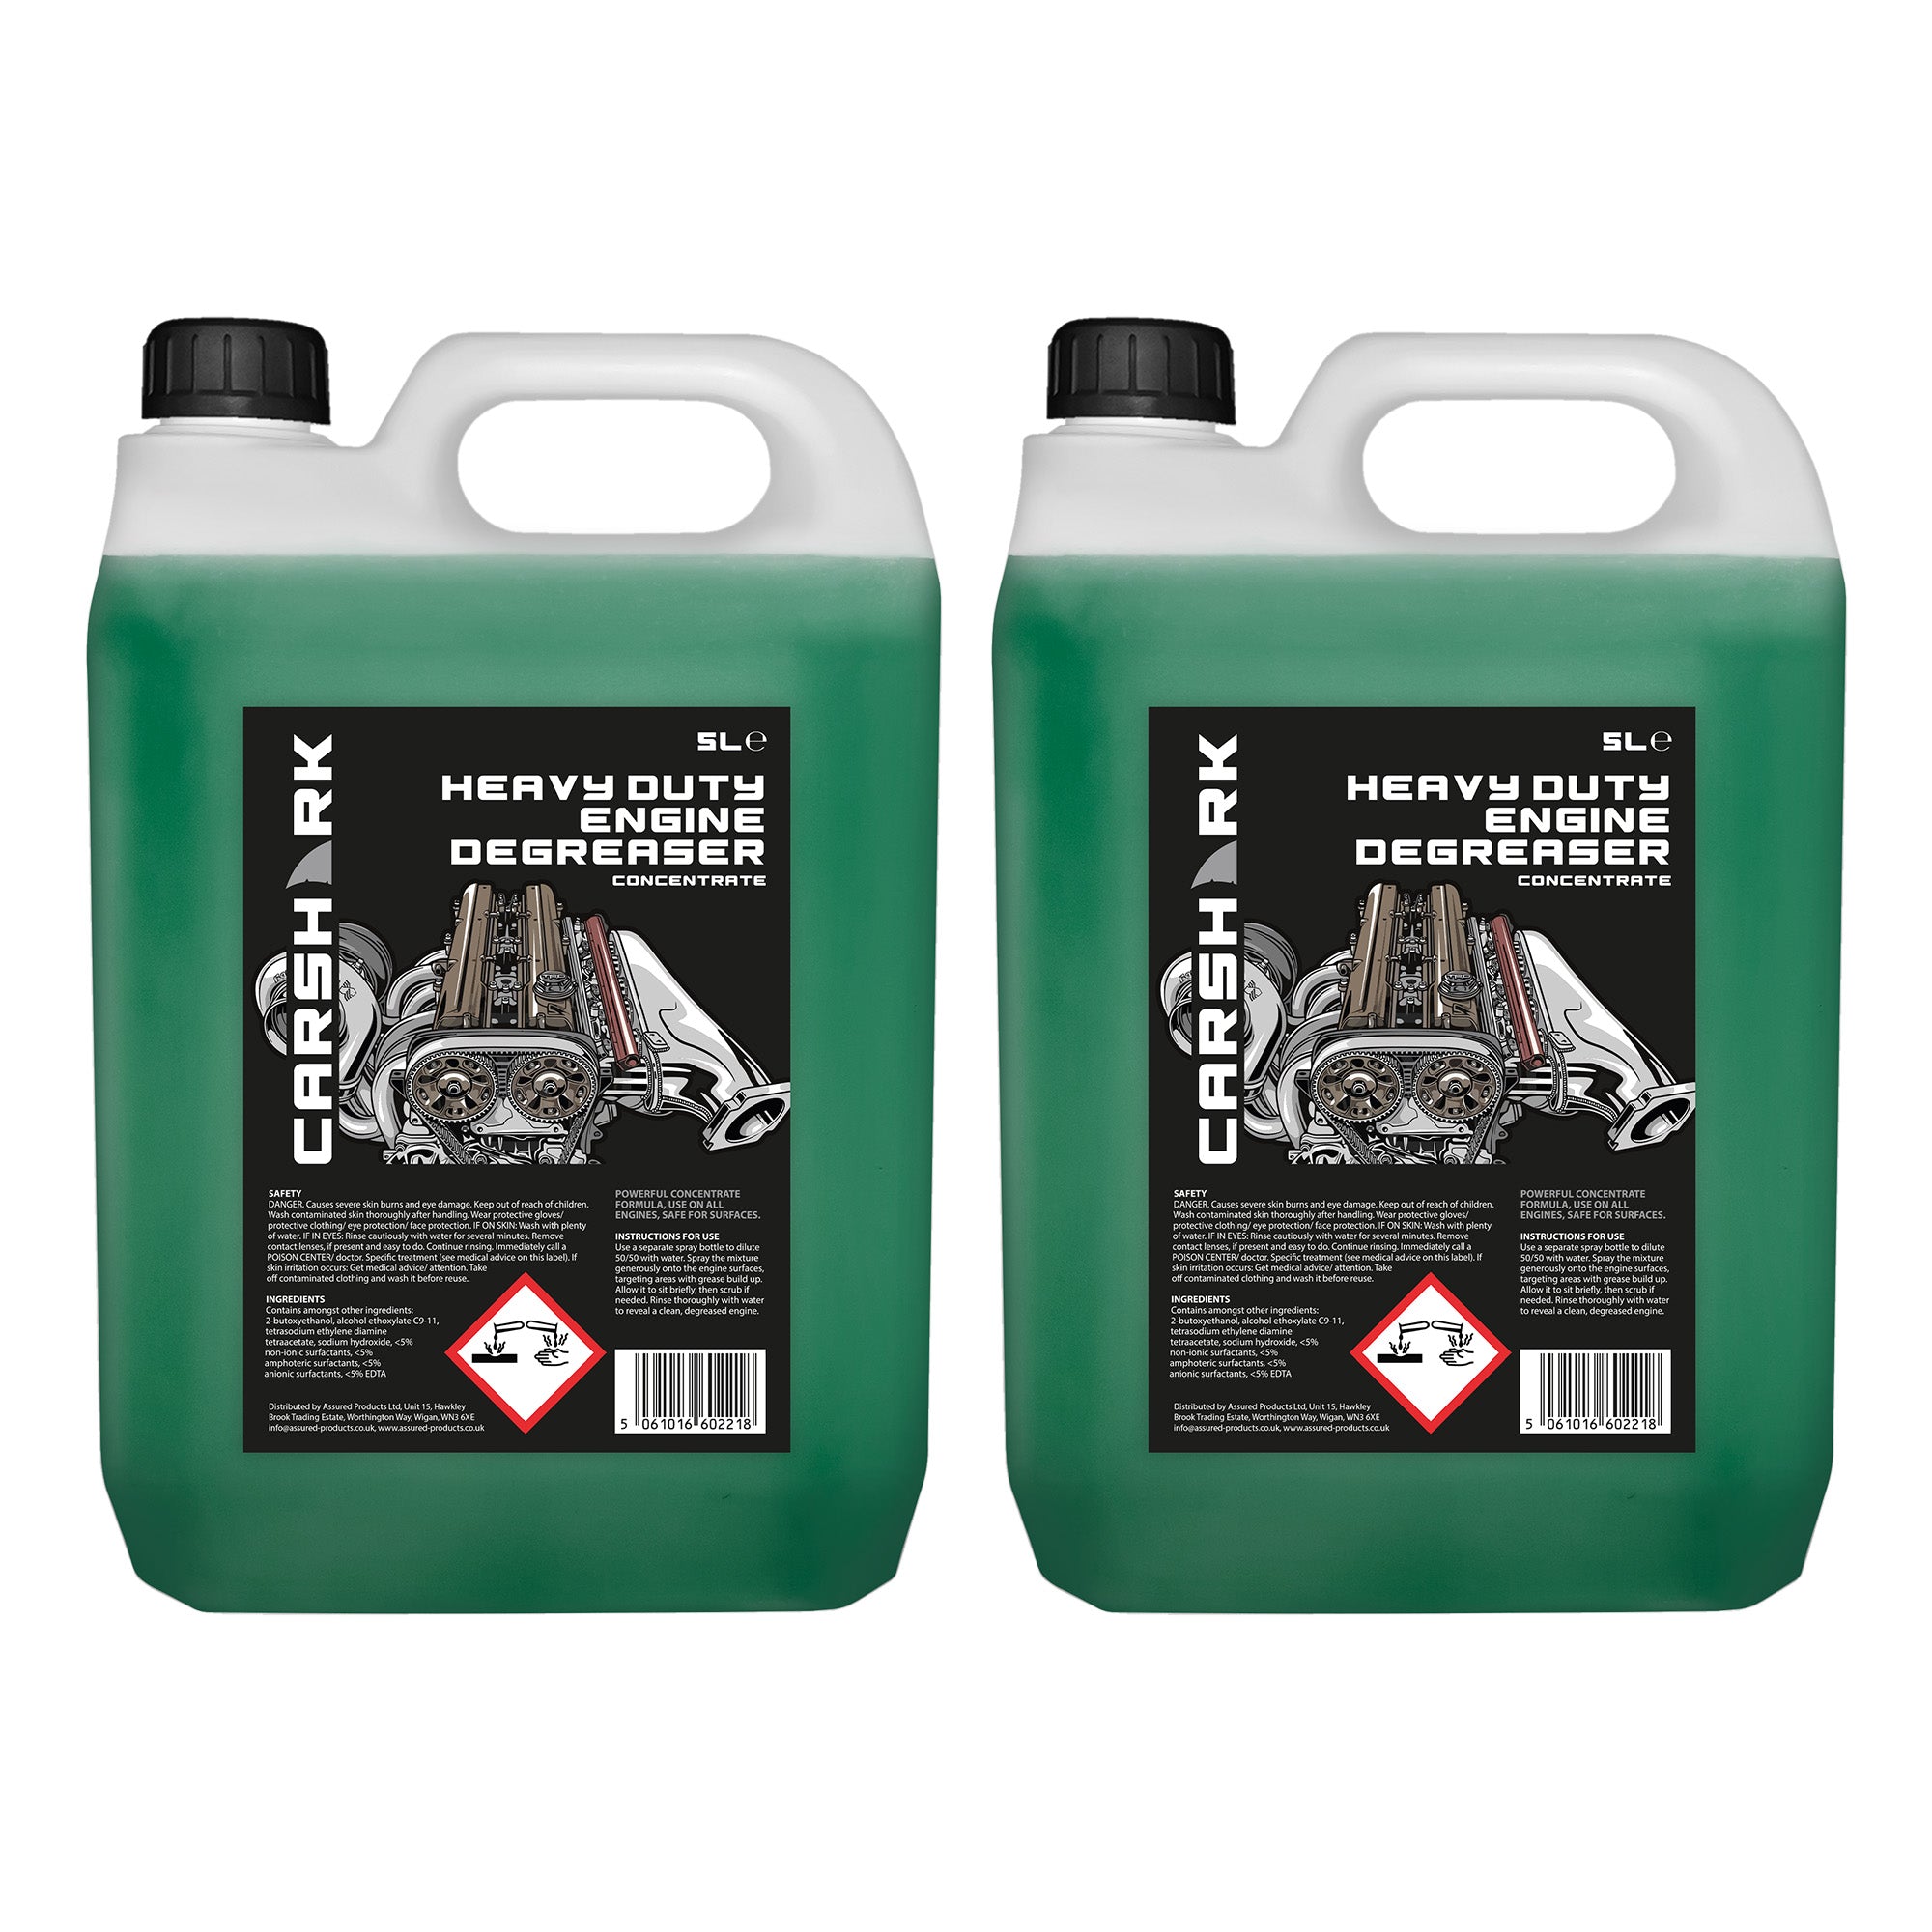 CARSHARK Engine Degreaser - 2 x 5L - Heavy Duty Concentrate